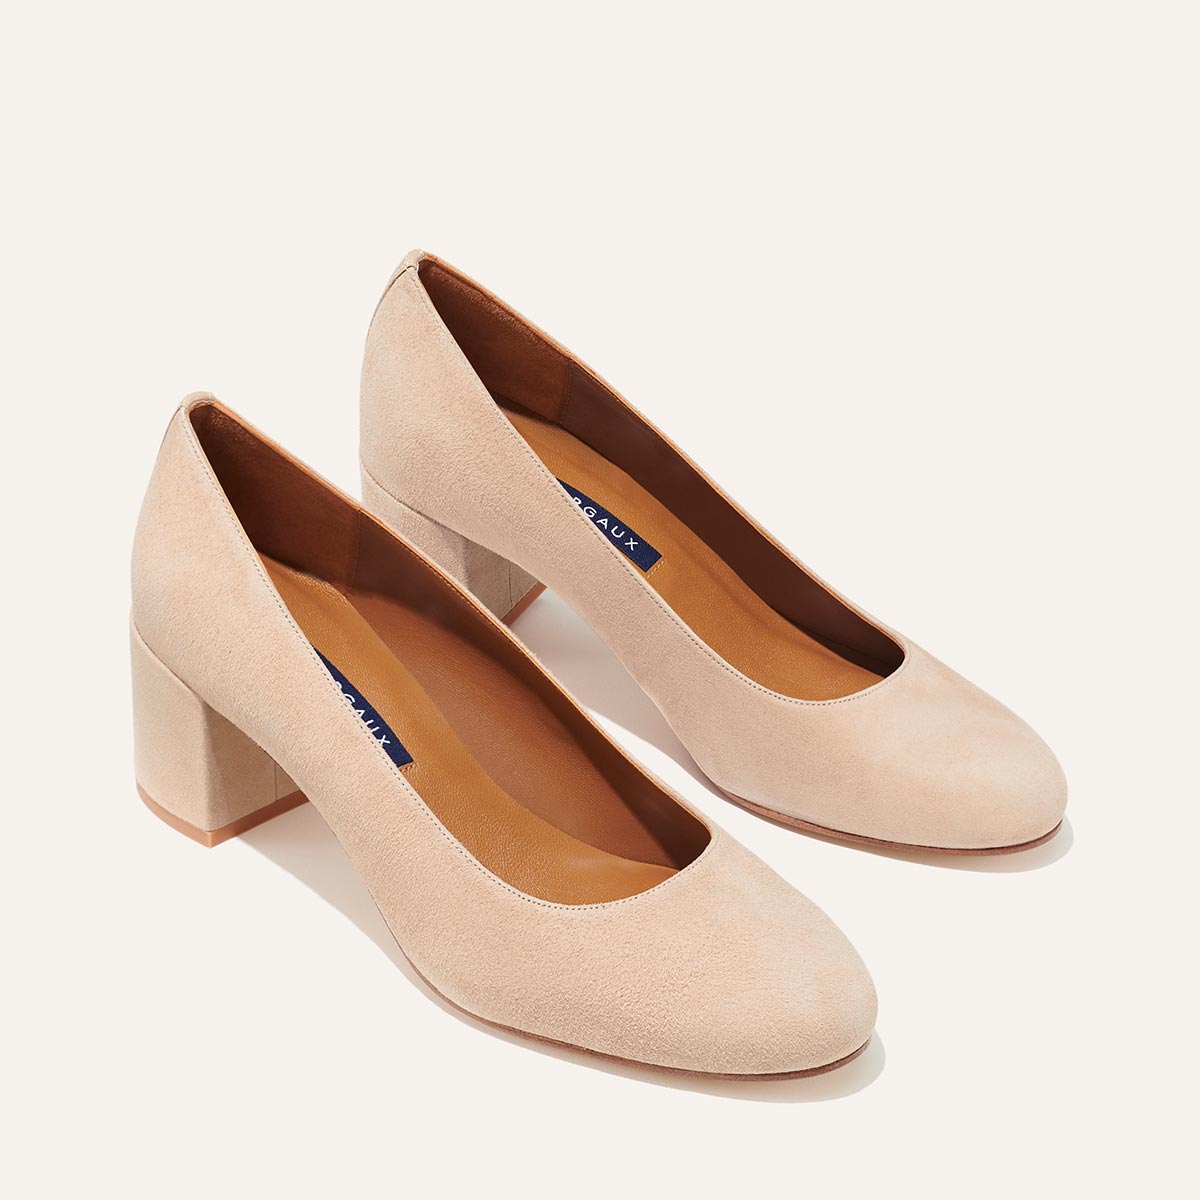 The Heel - Fawn Suede